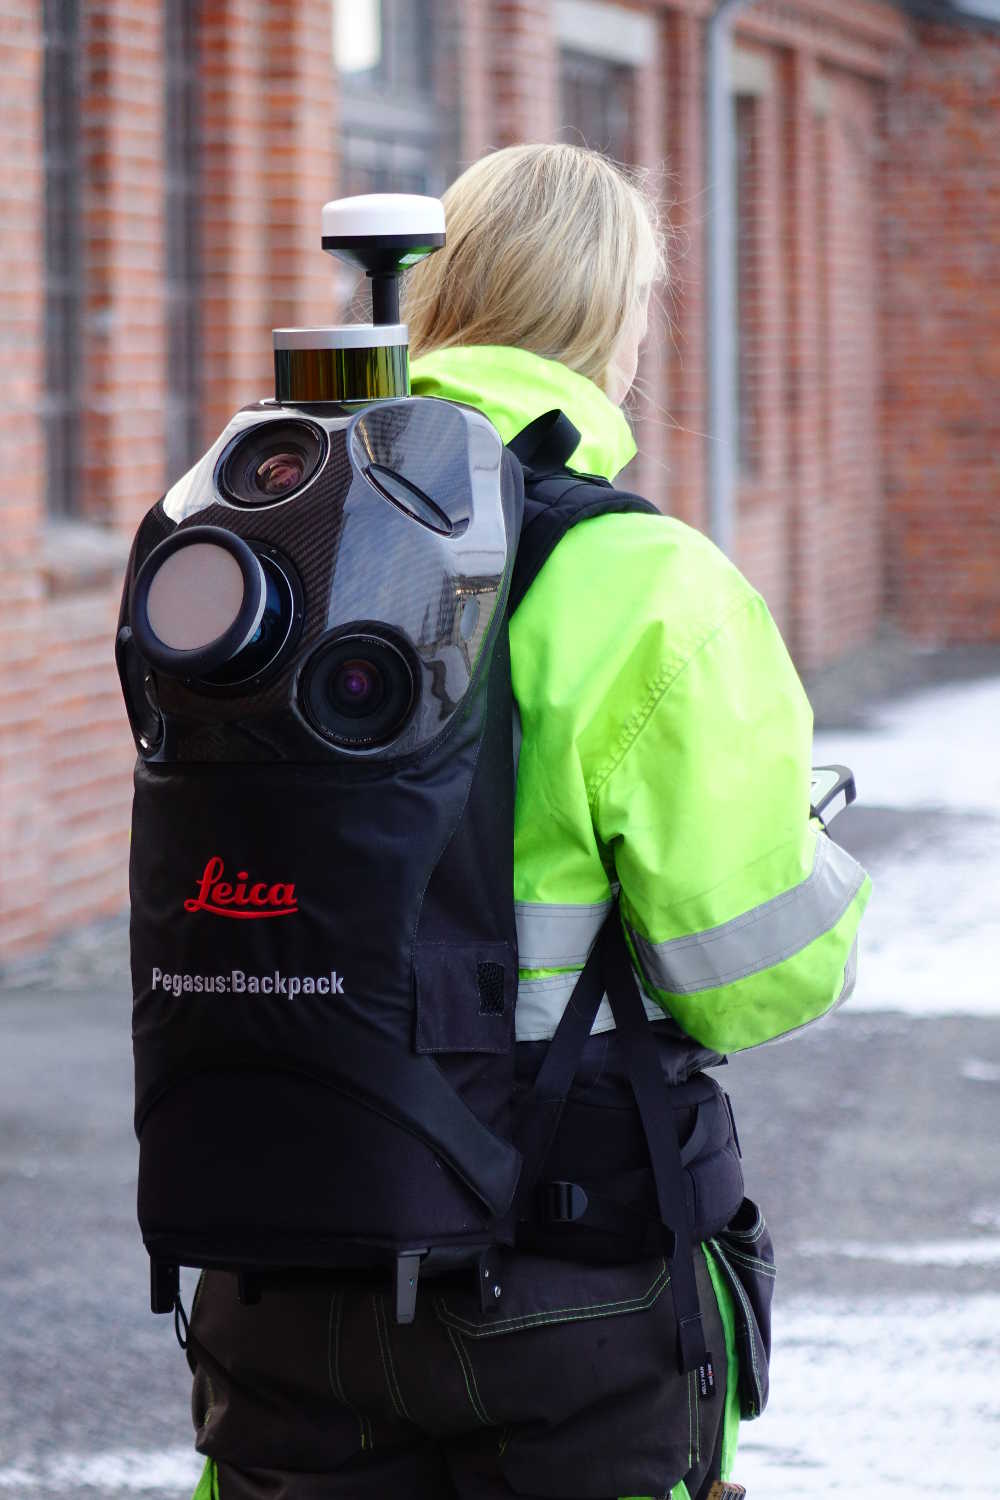 scan survey staff member using the Leica pegasus for mobile mapping